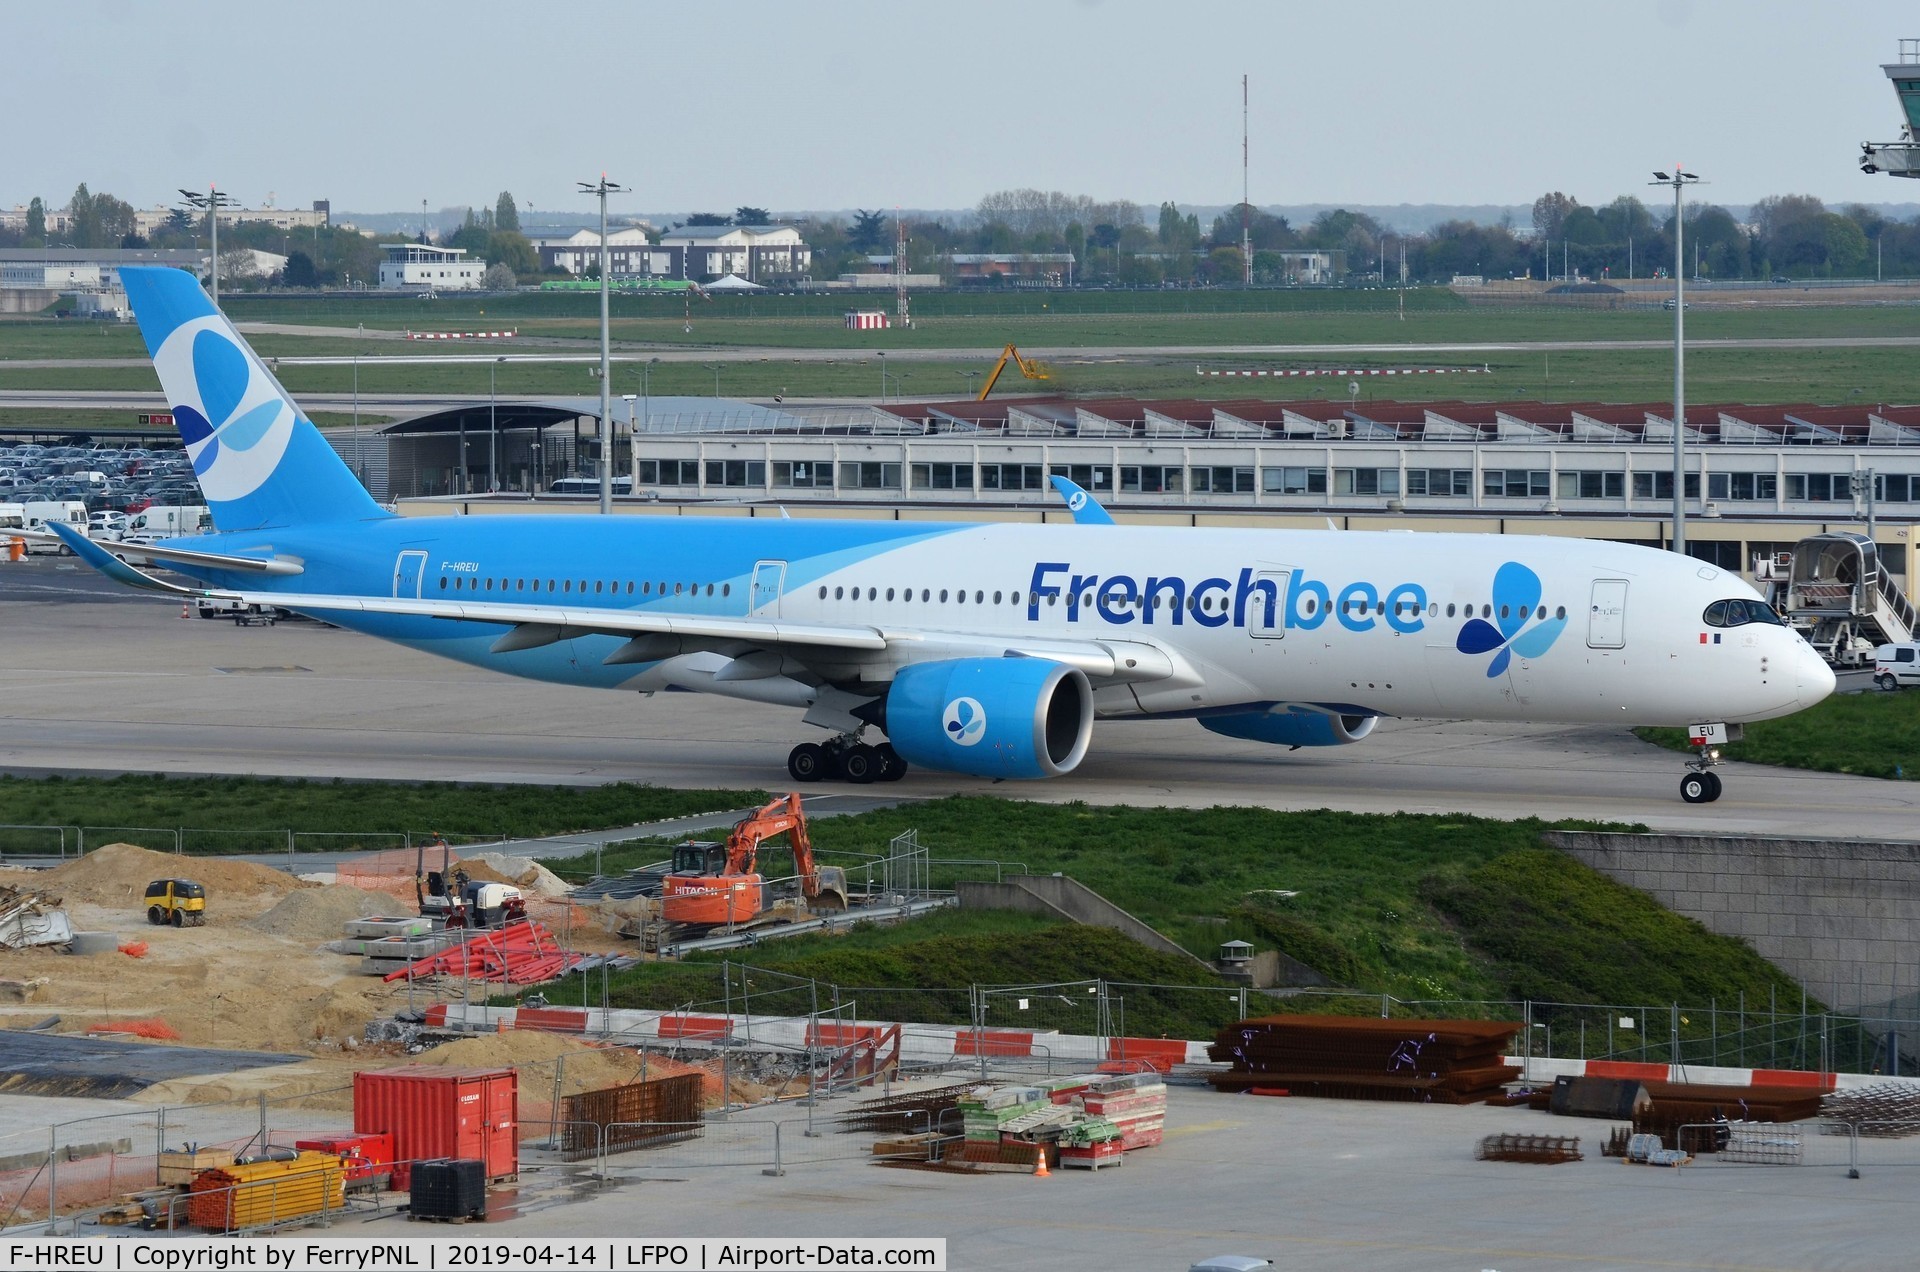 F-HREU, 2014 Airbus A350-941 C/N 005, French Bee A359 taxying for departure